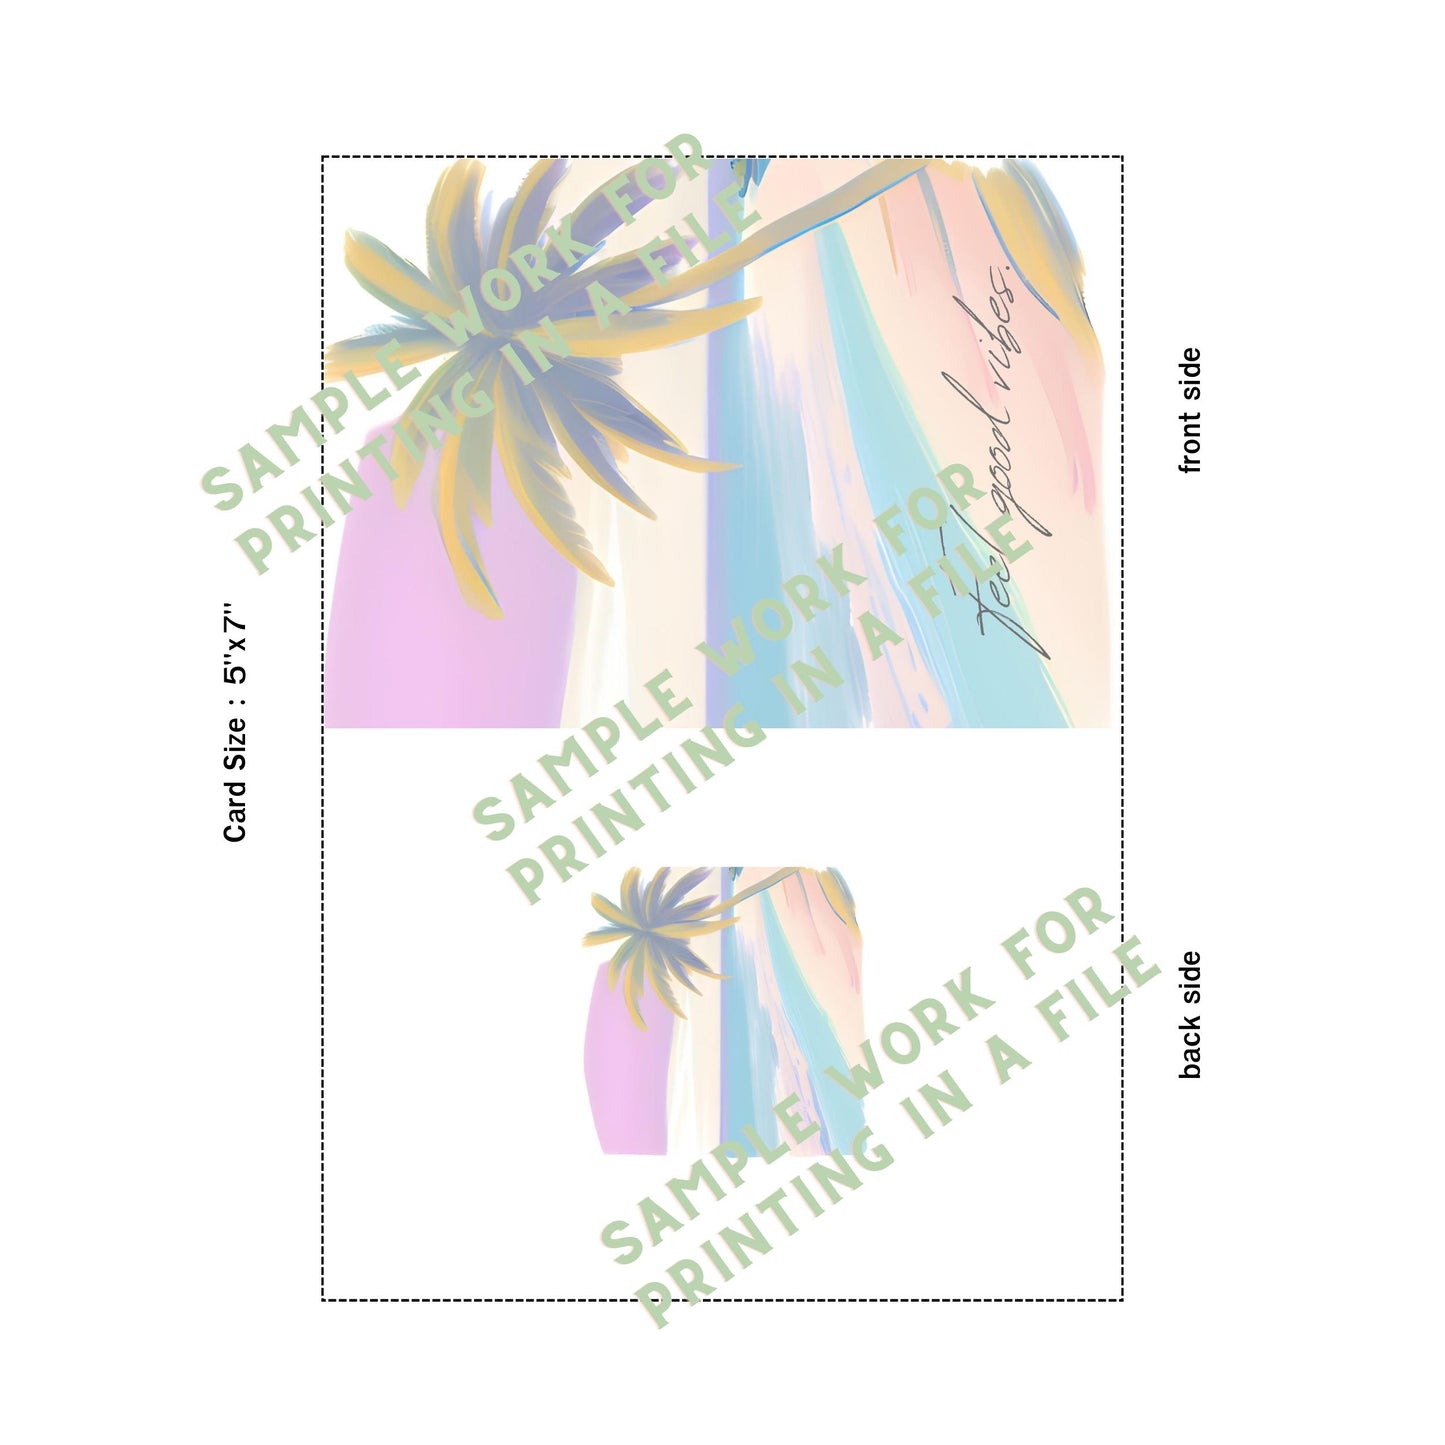 Wording Printable Card, Sweet Beach Vol.2, card size 5"x7", print on 8.5"x11" paper size